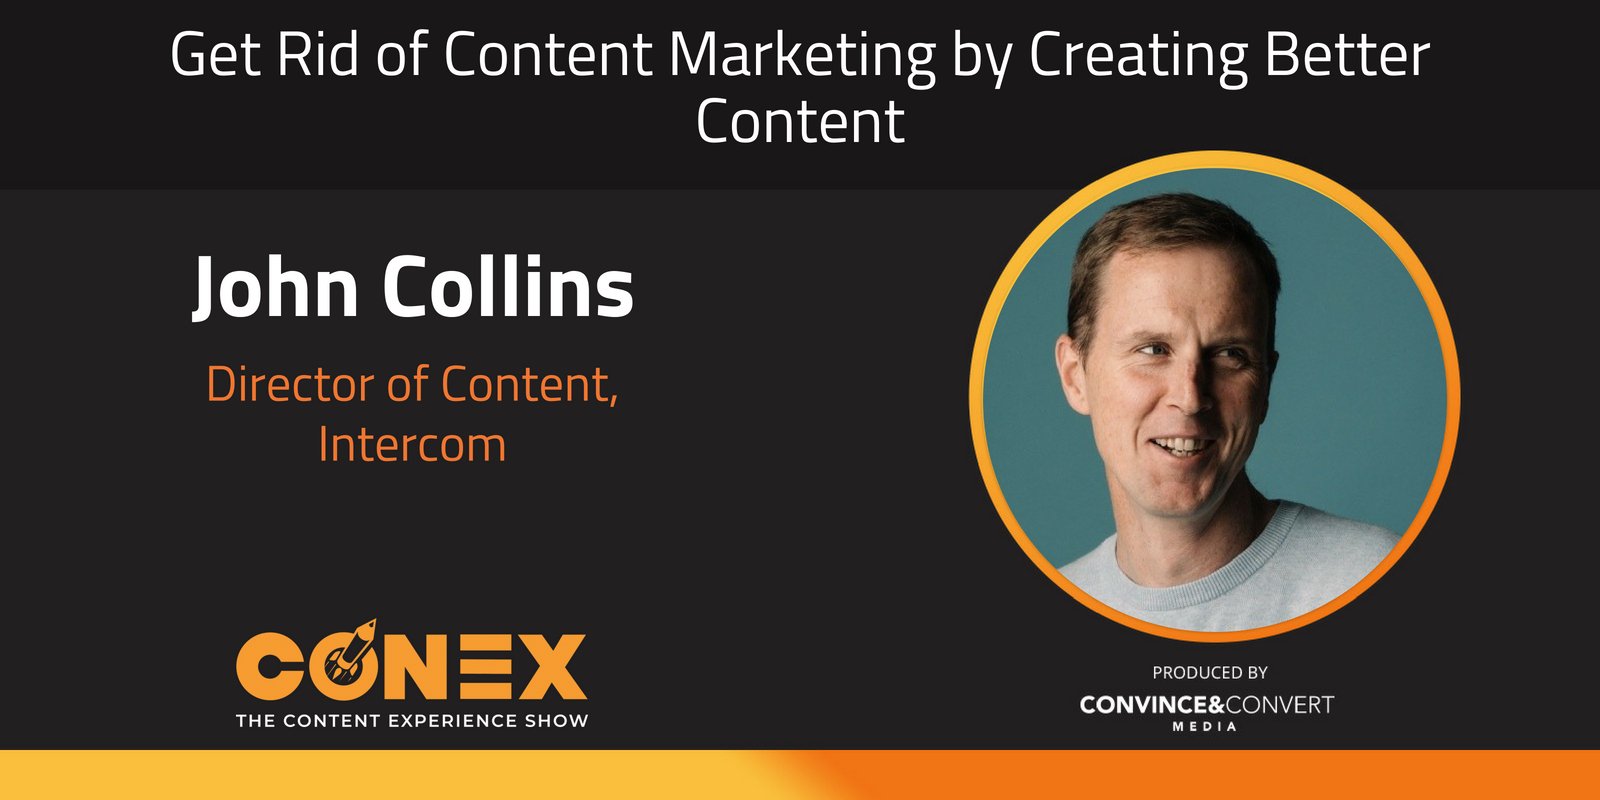 Get Rid of Content Marketing by Creating Better Content